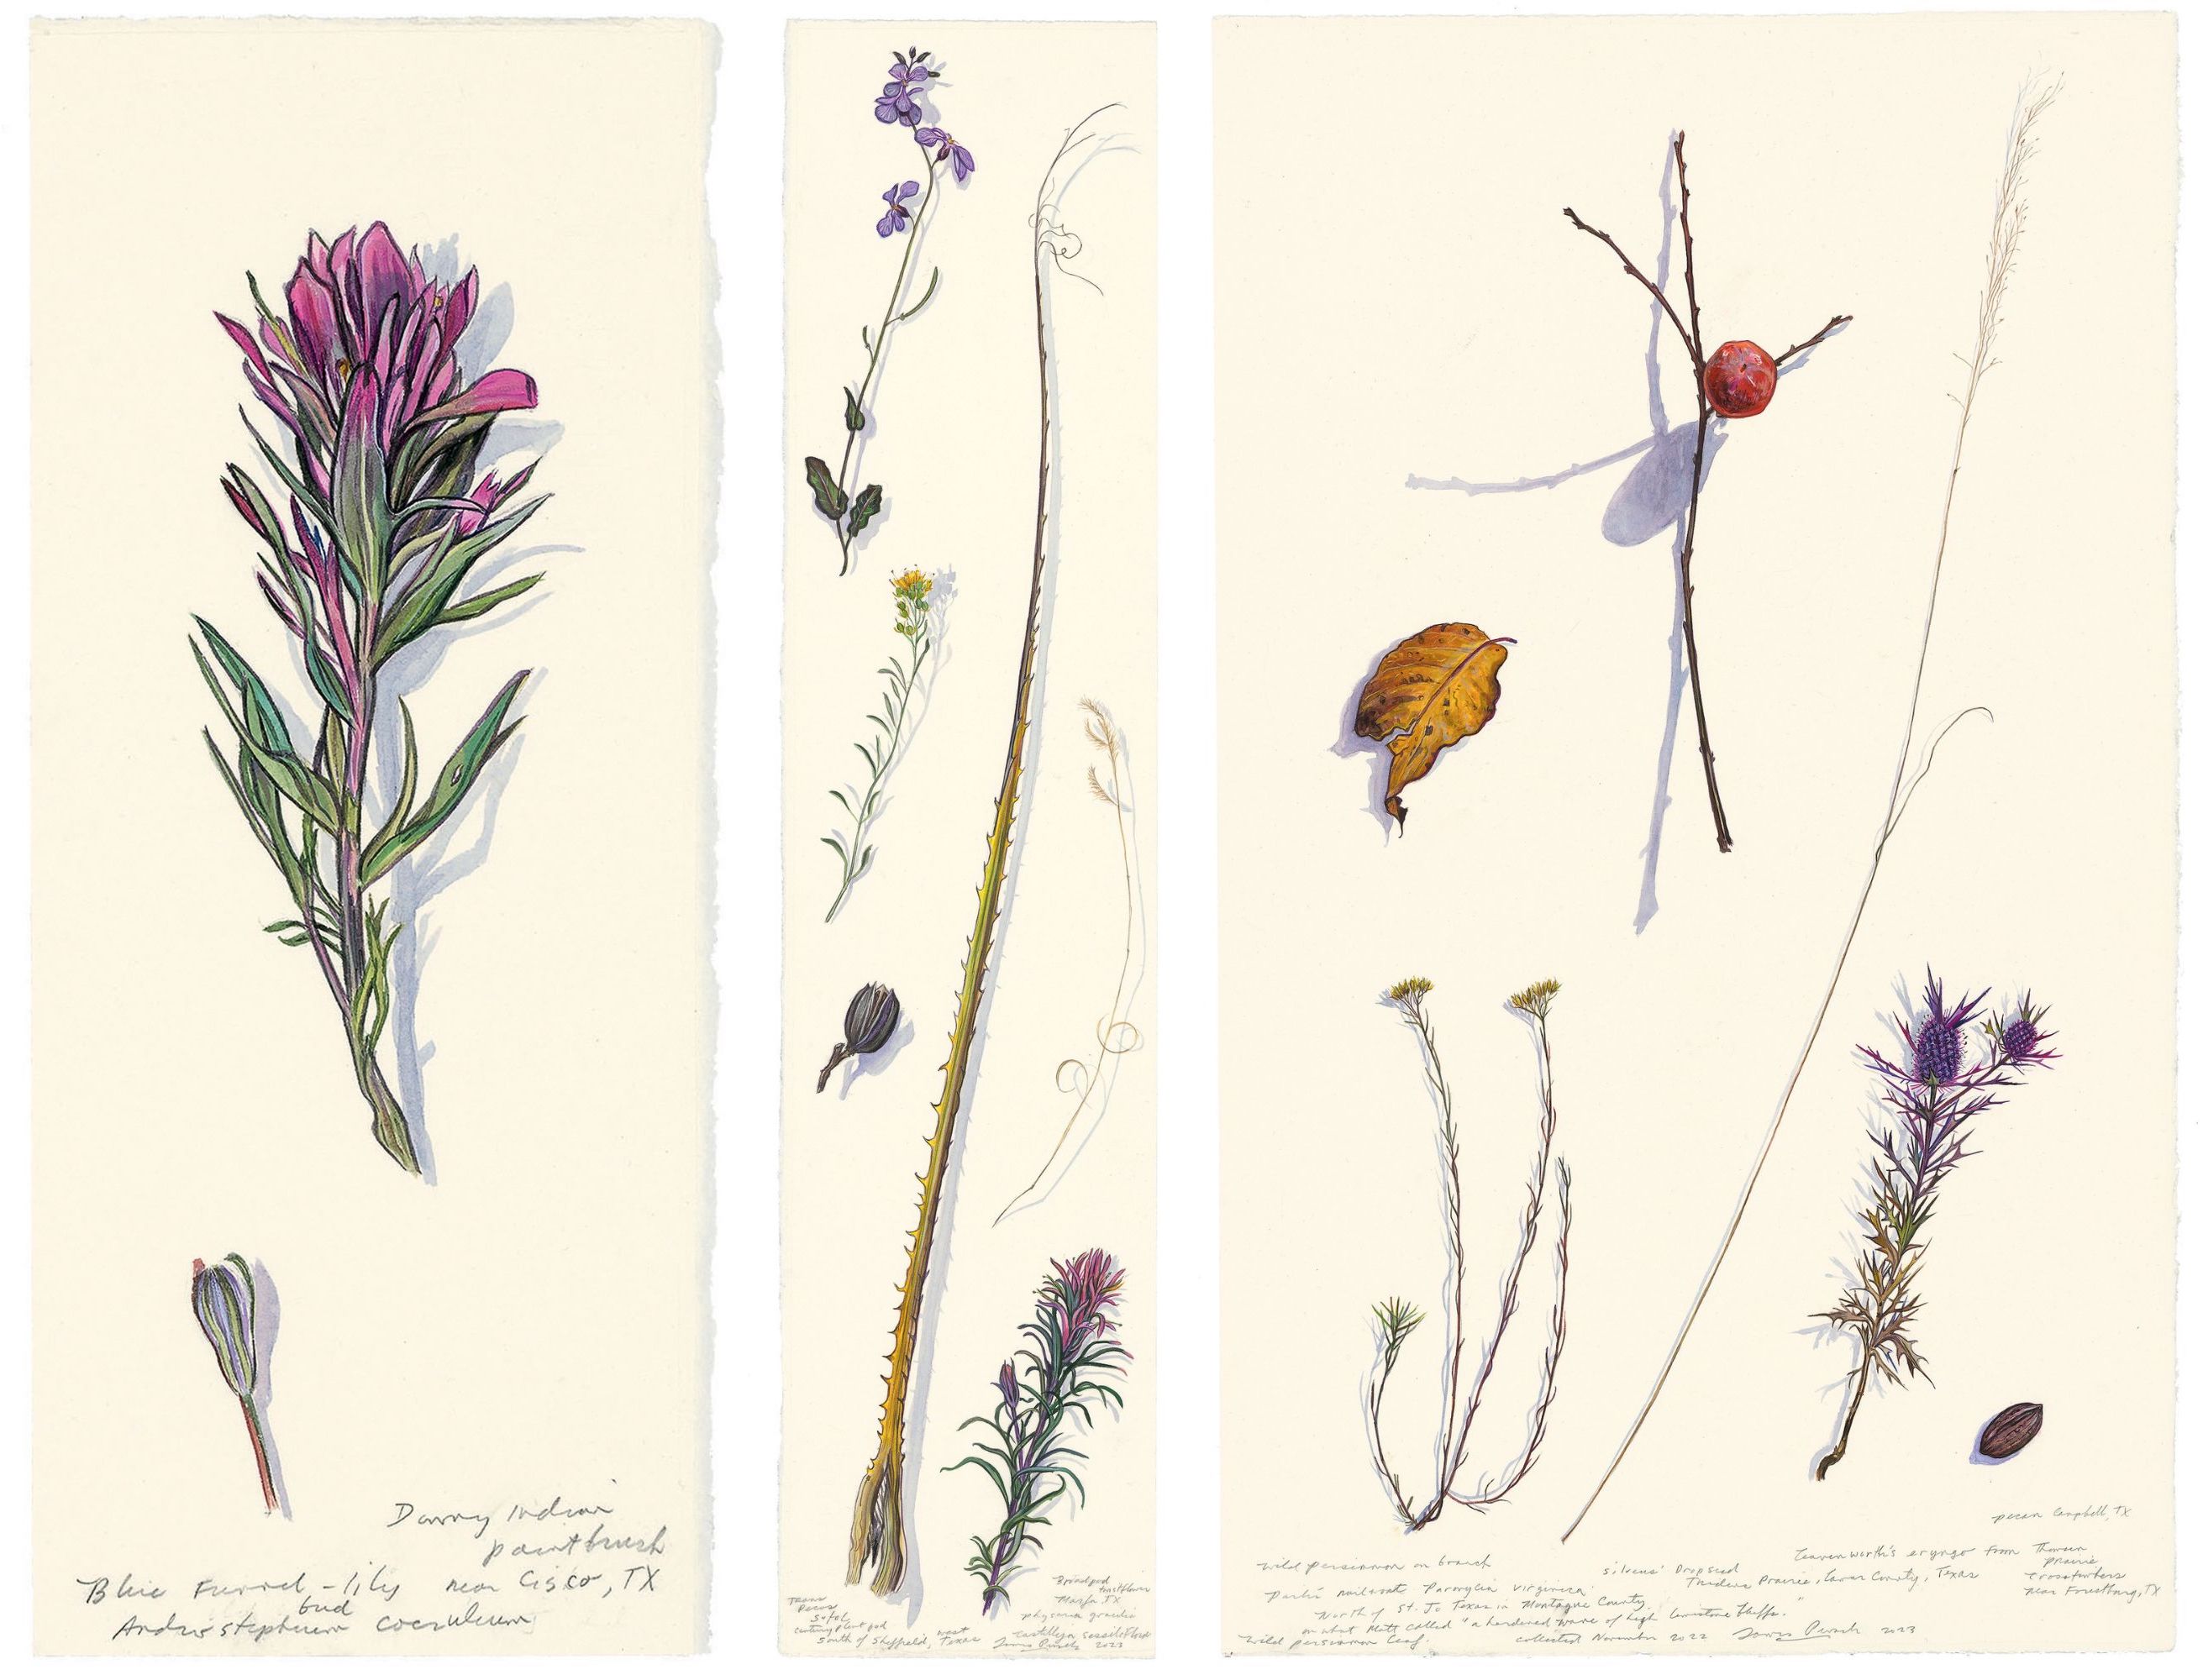 A series of three paintings on paper with flowers, grasses, and leaves in extreme detail